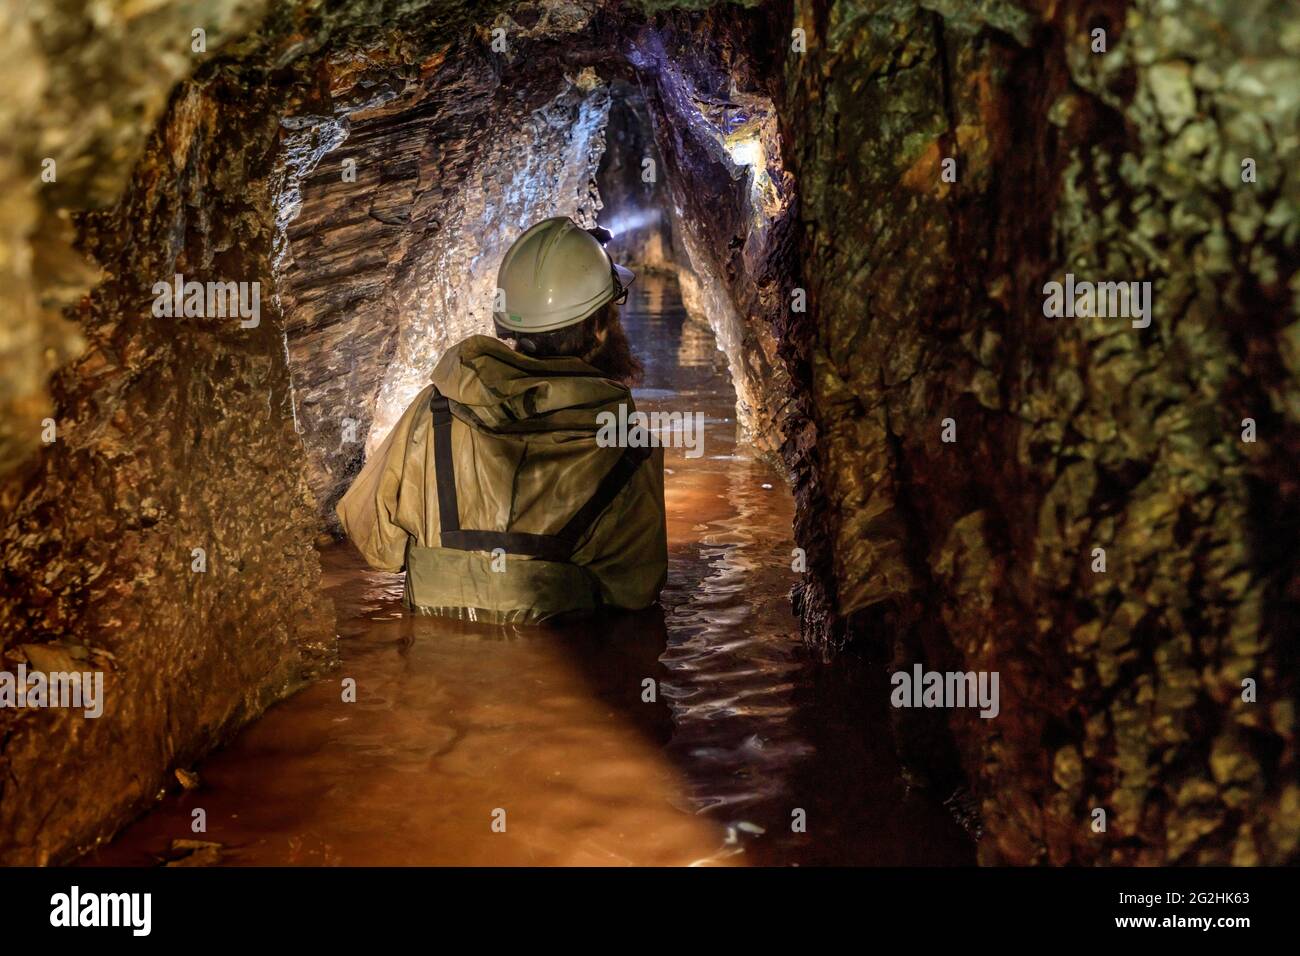 Rosenbuschzeche in Crottendorf - historical silver mining in the Ore Mountains Stock Photo